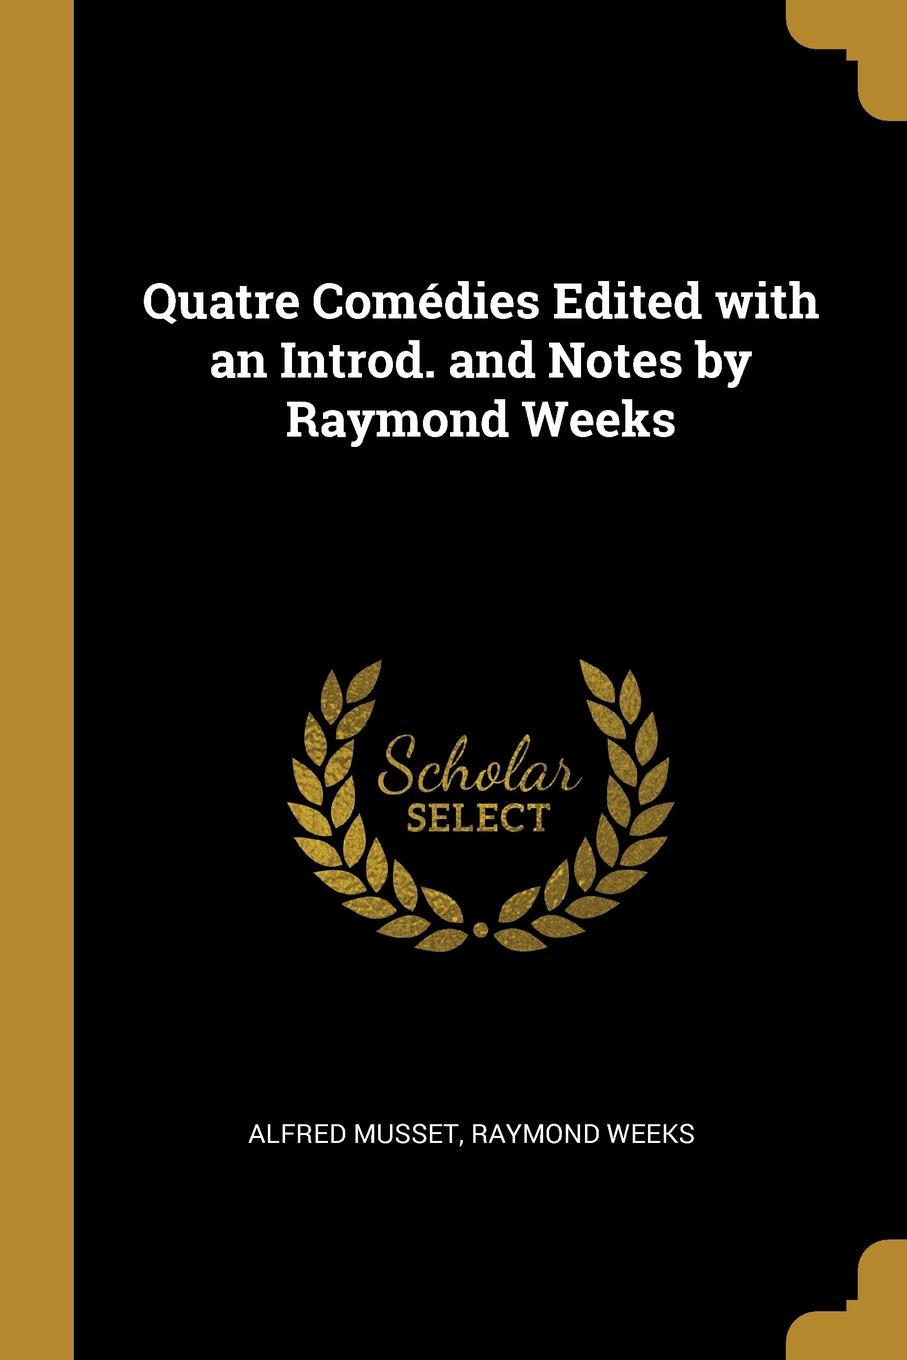 Quatre Comedies Edited with an Introd. and Notes by Raymond Weeks